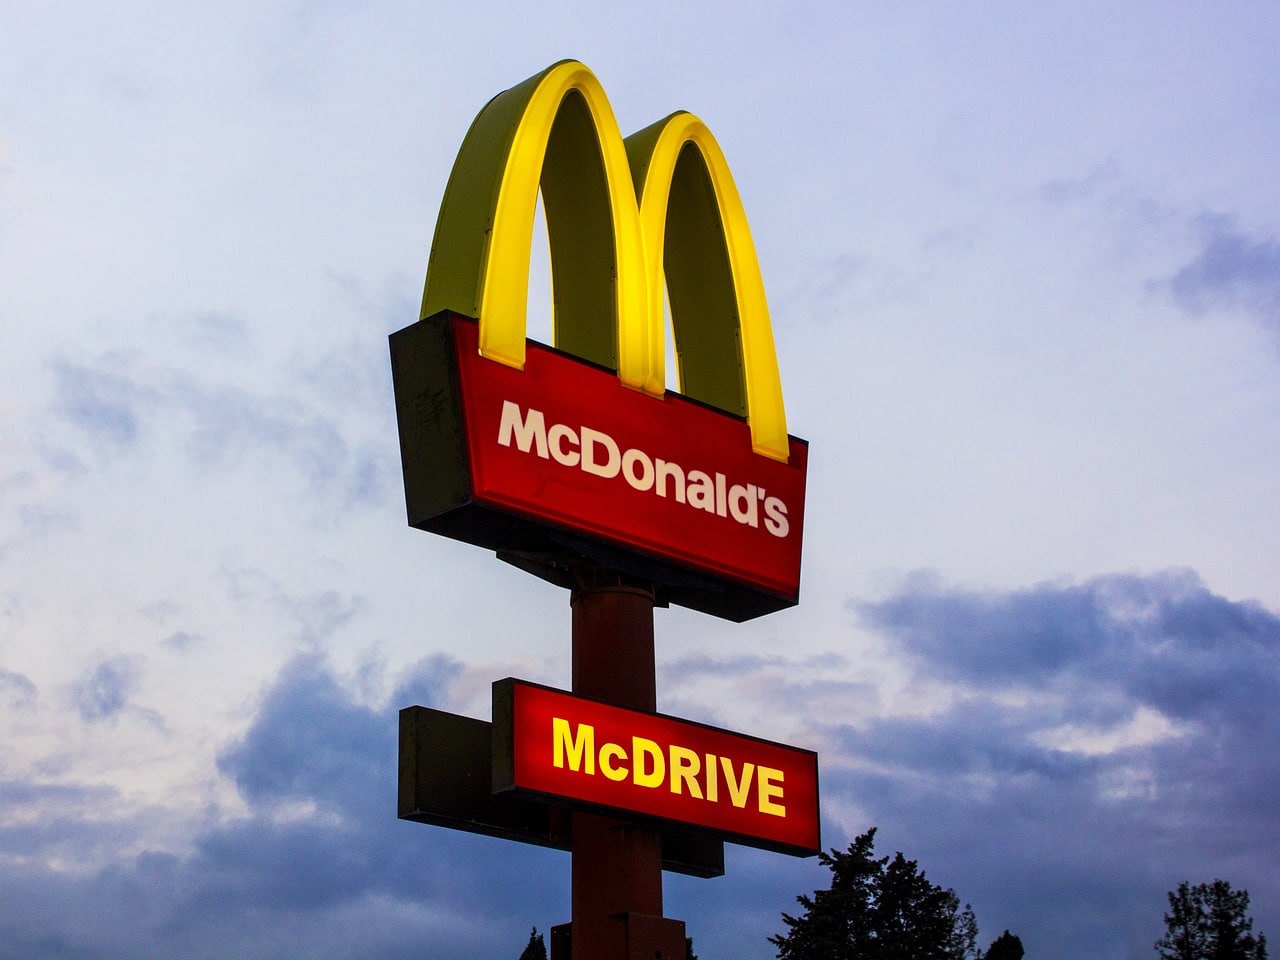 McDonald's Prices - How Affordable Are They for Customers